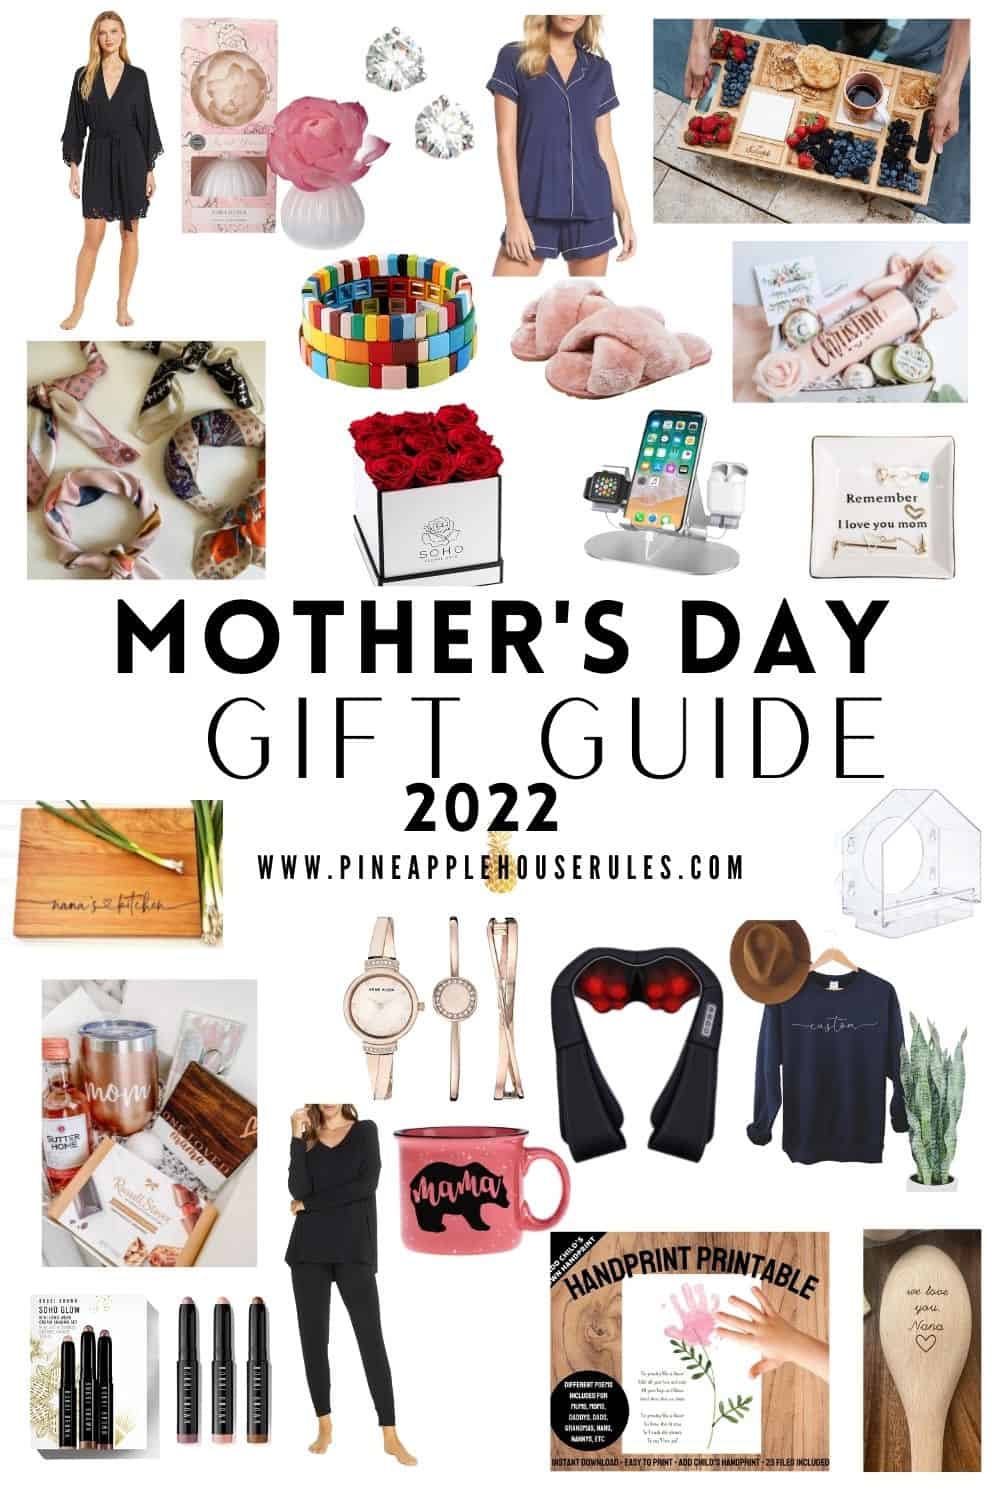 This Mother's Day Gift Guide 2022 is all about treating those Mamas in our lives with some love and comfort! There are a wide arrange of gift ideas from clothing to accessories to electronics! Mothers Day Gifts | Mothers Day Gifts from Kids | Mothers Day Gift Ideas | Mothers Day Gift Basket | Mothers Day Gifts for Church Ladies | Mothers Day Gifts Preschool | Gifts for Her | Gift Ideas for Her | Gifts for Girlfriend | Gifts for Moms Birthday | Gift Guide | Mother's Day Gift Ideas | Gifts